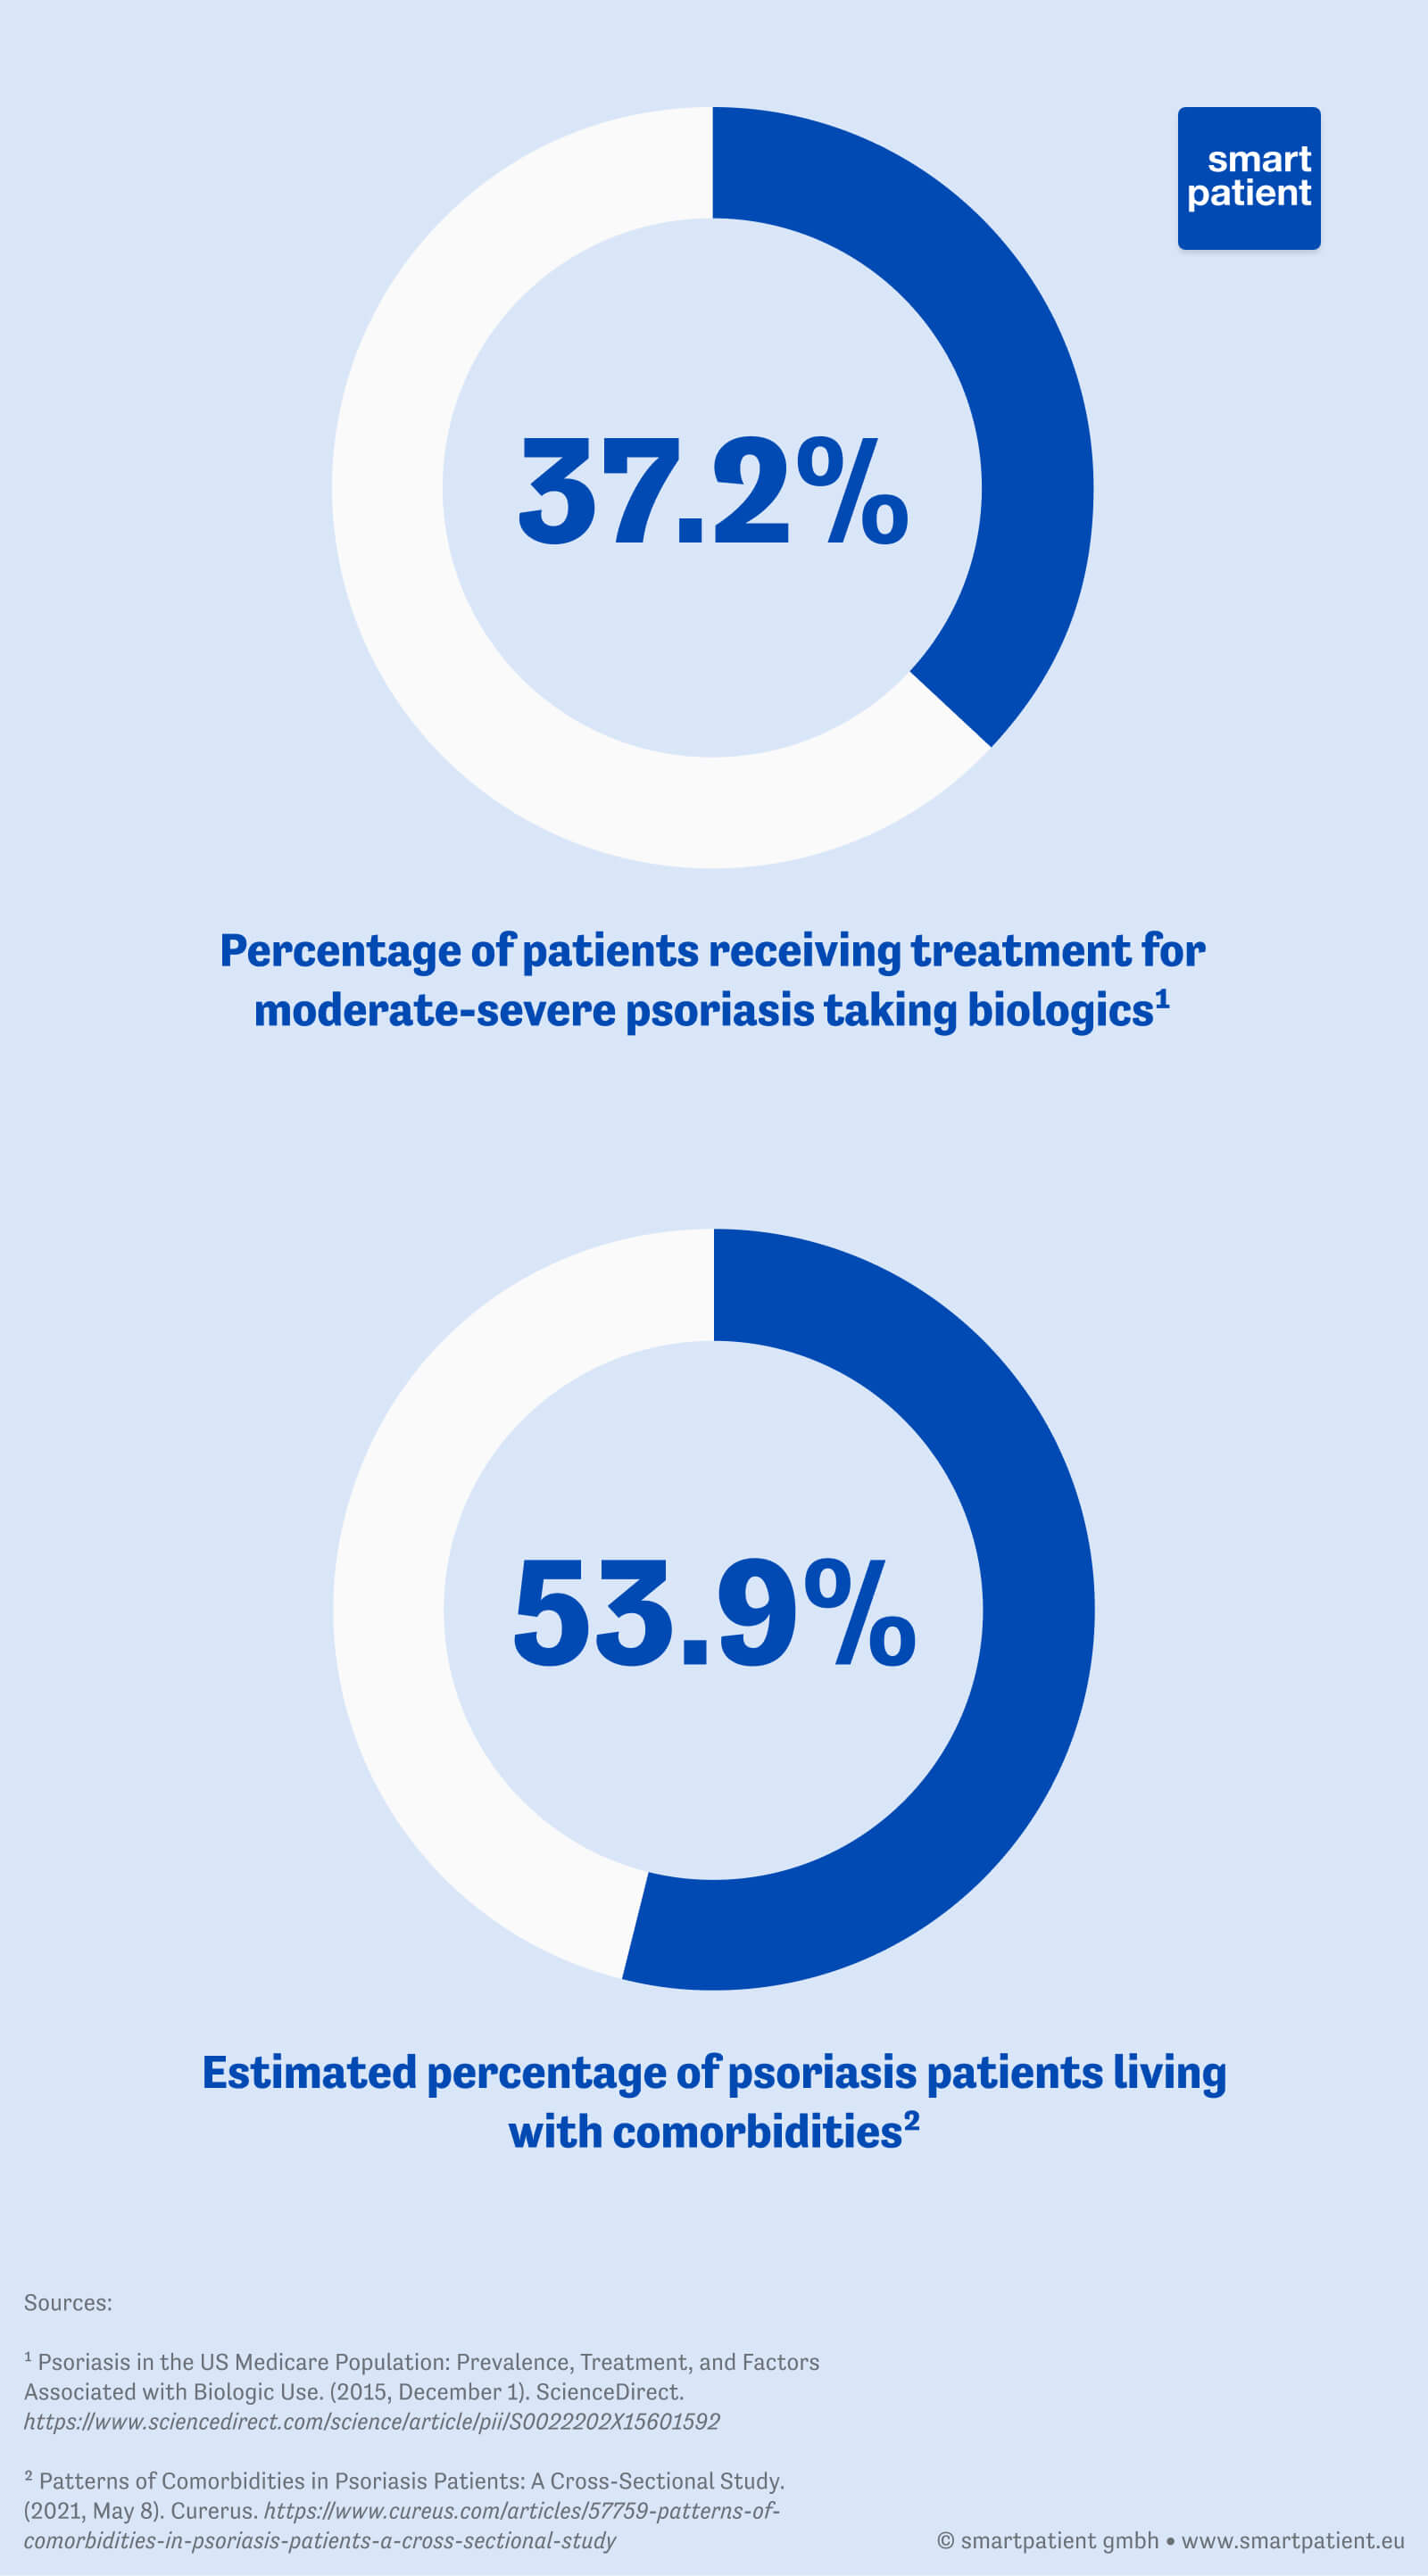 graphs showing that 37.2% of people receiving treatment for moderate-severe psoriasis are taking biologics and that 53.9% of people living with psoriasis have comorbidities